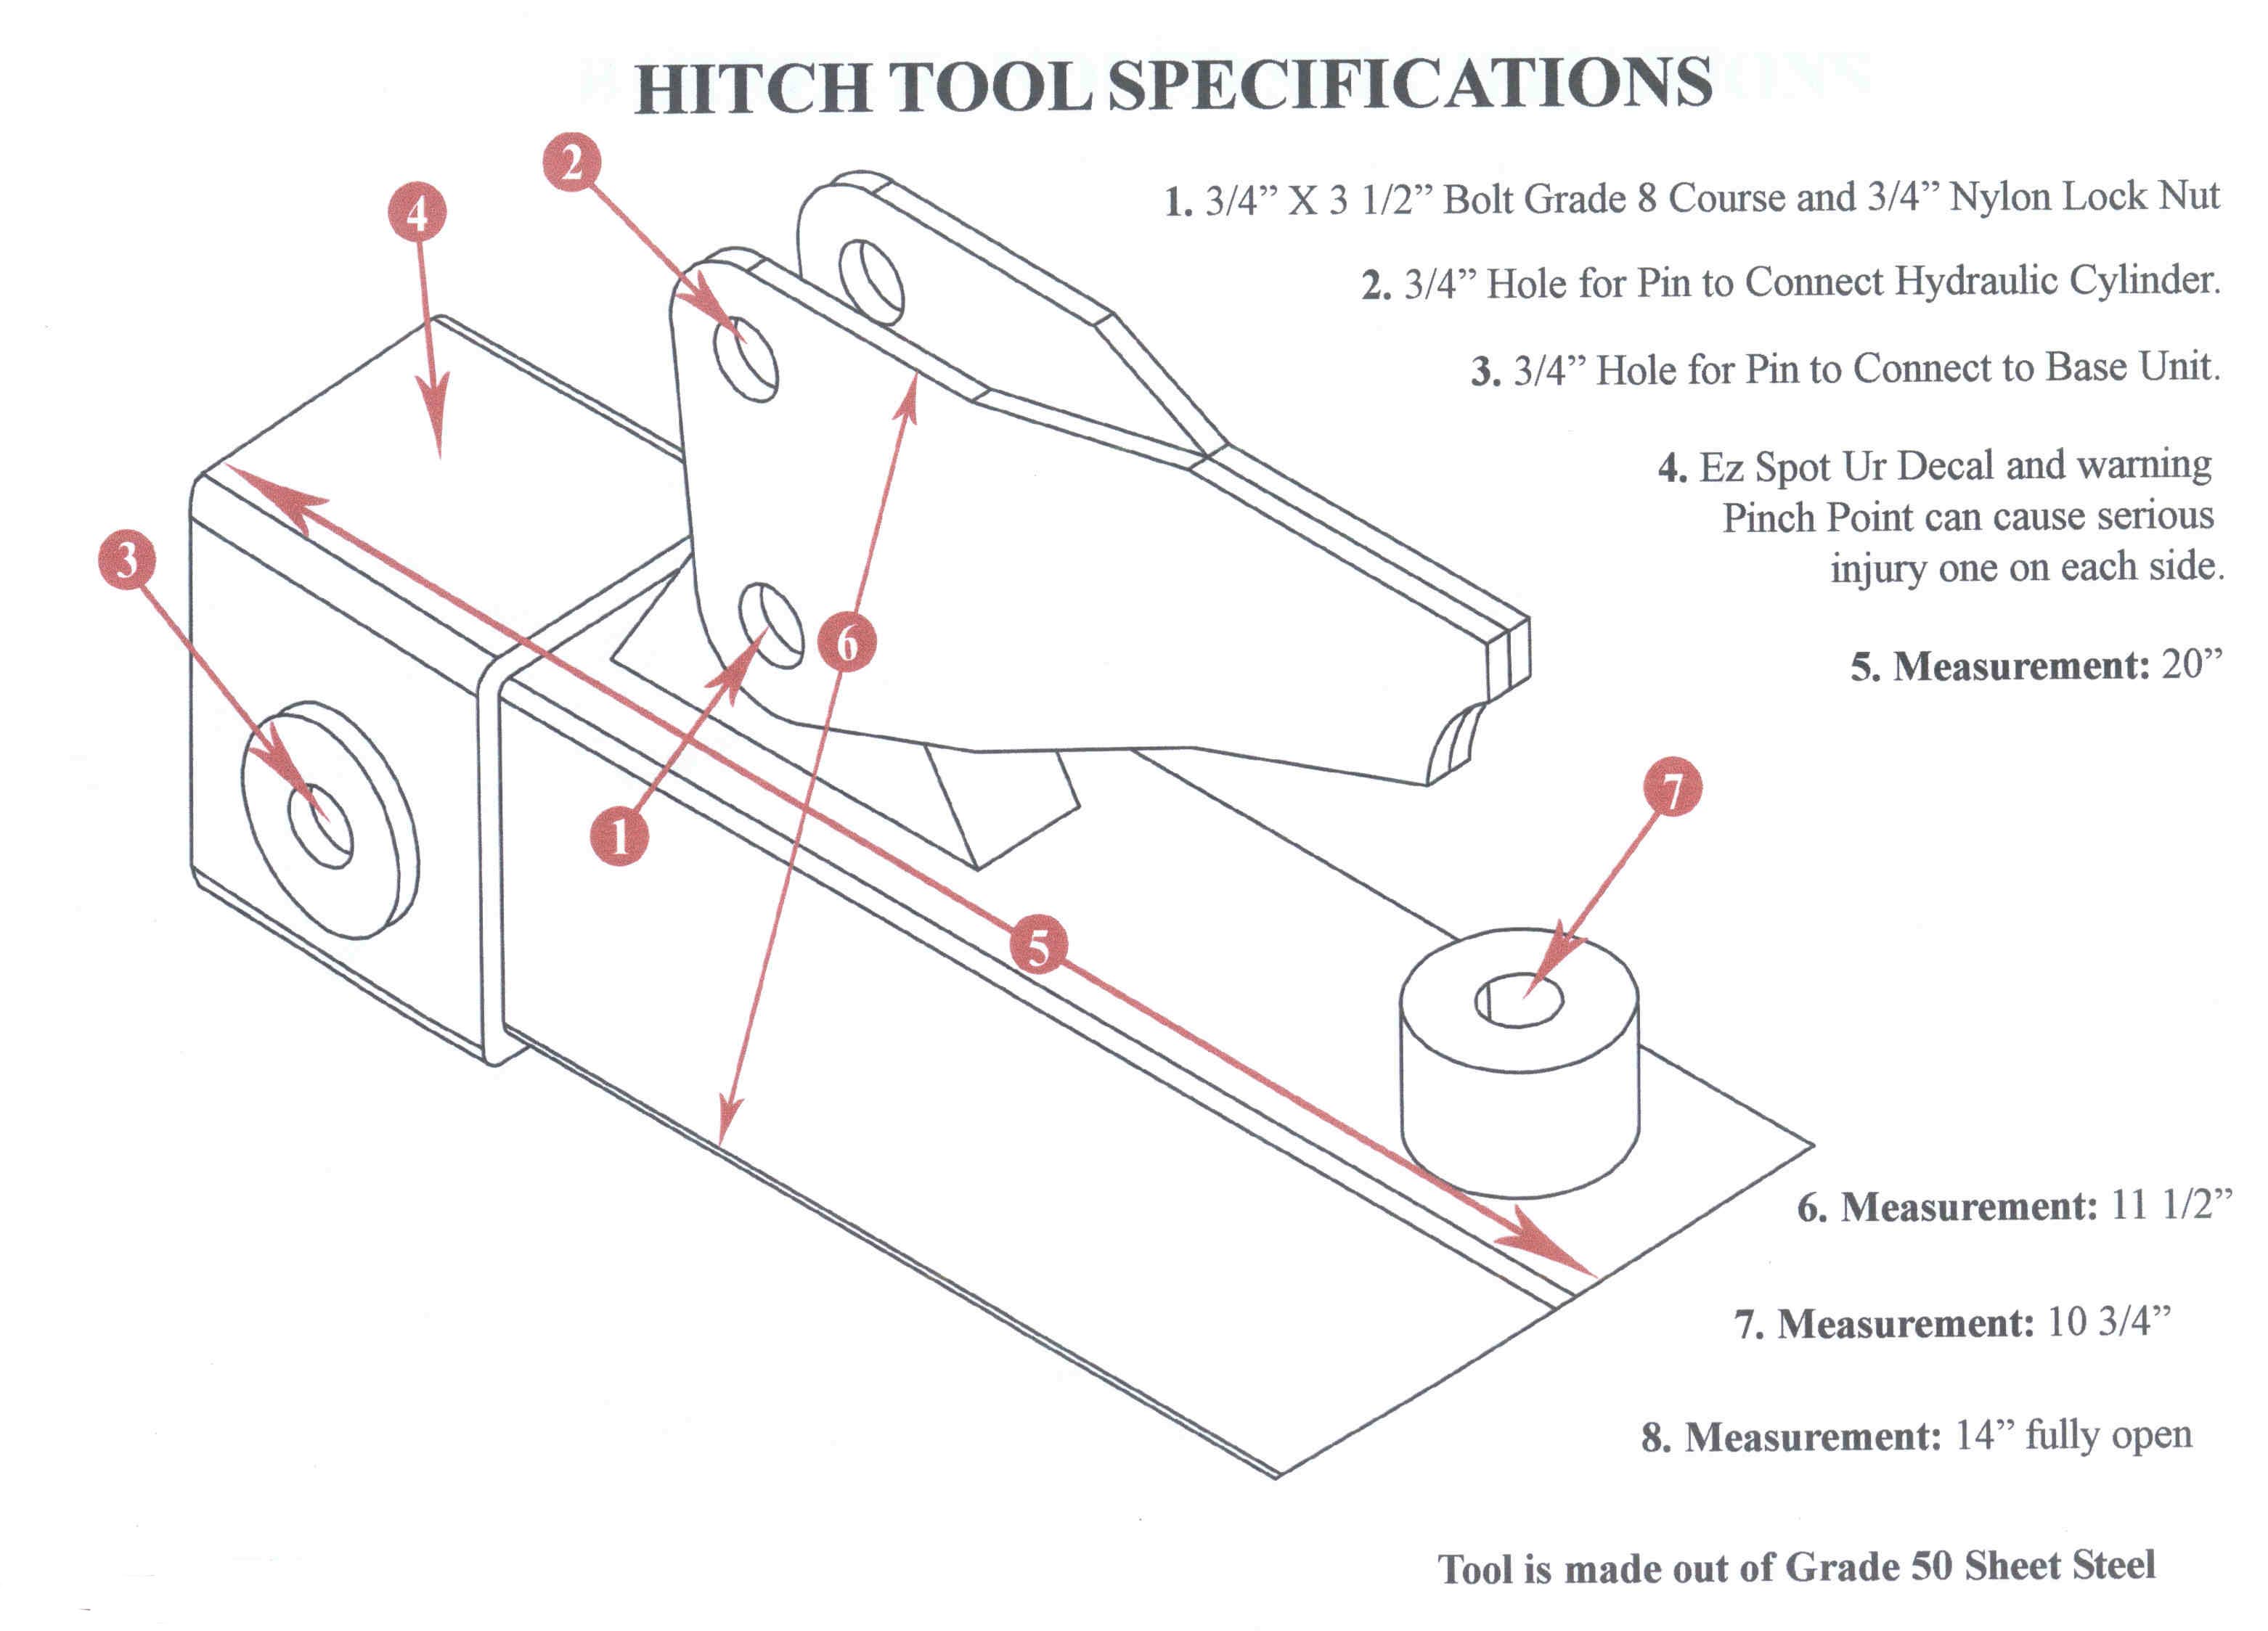 Specifications Hitch Tool